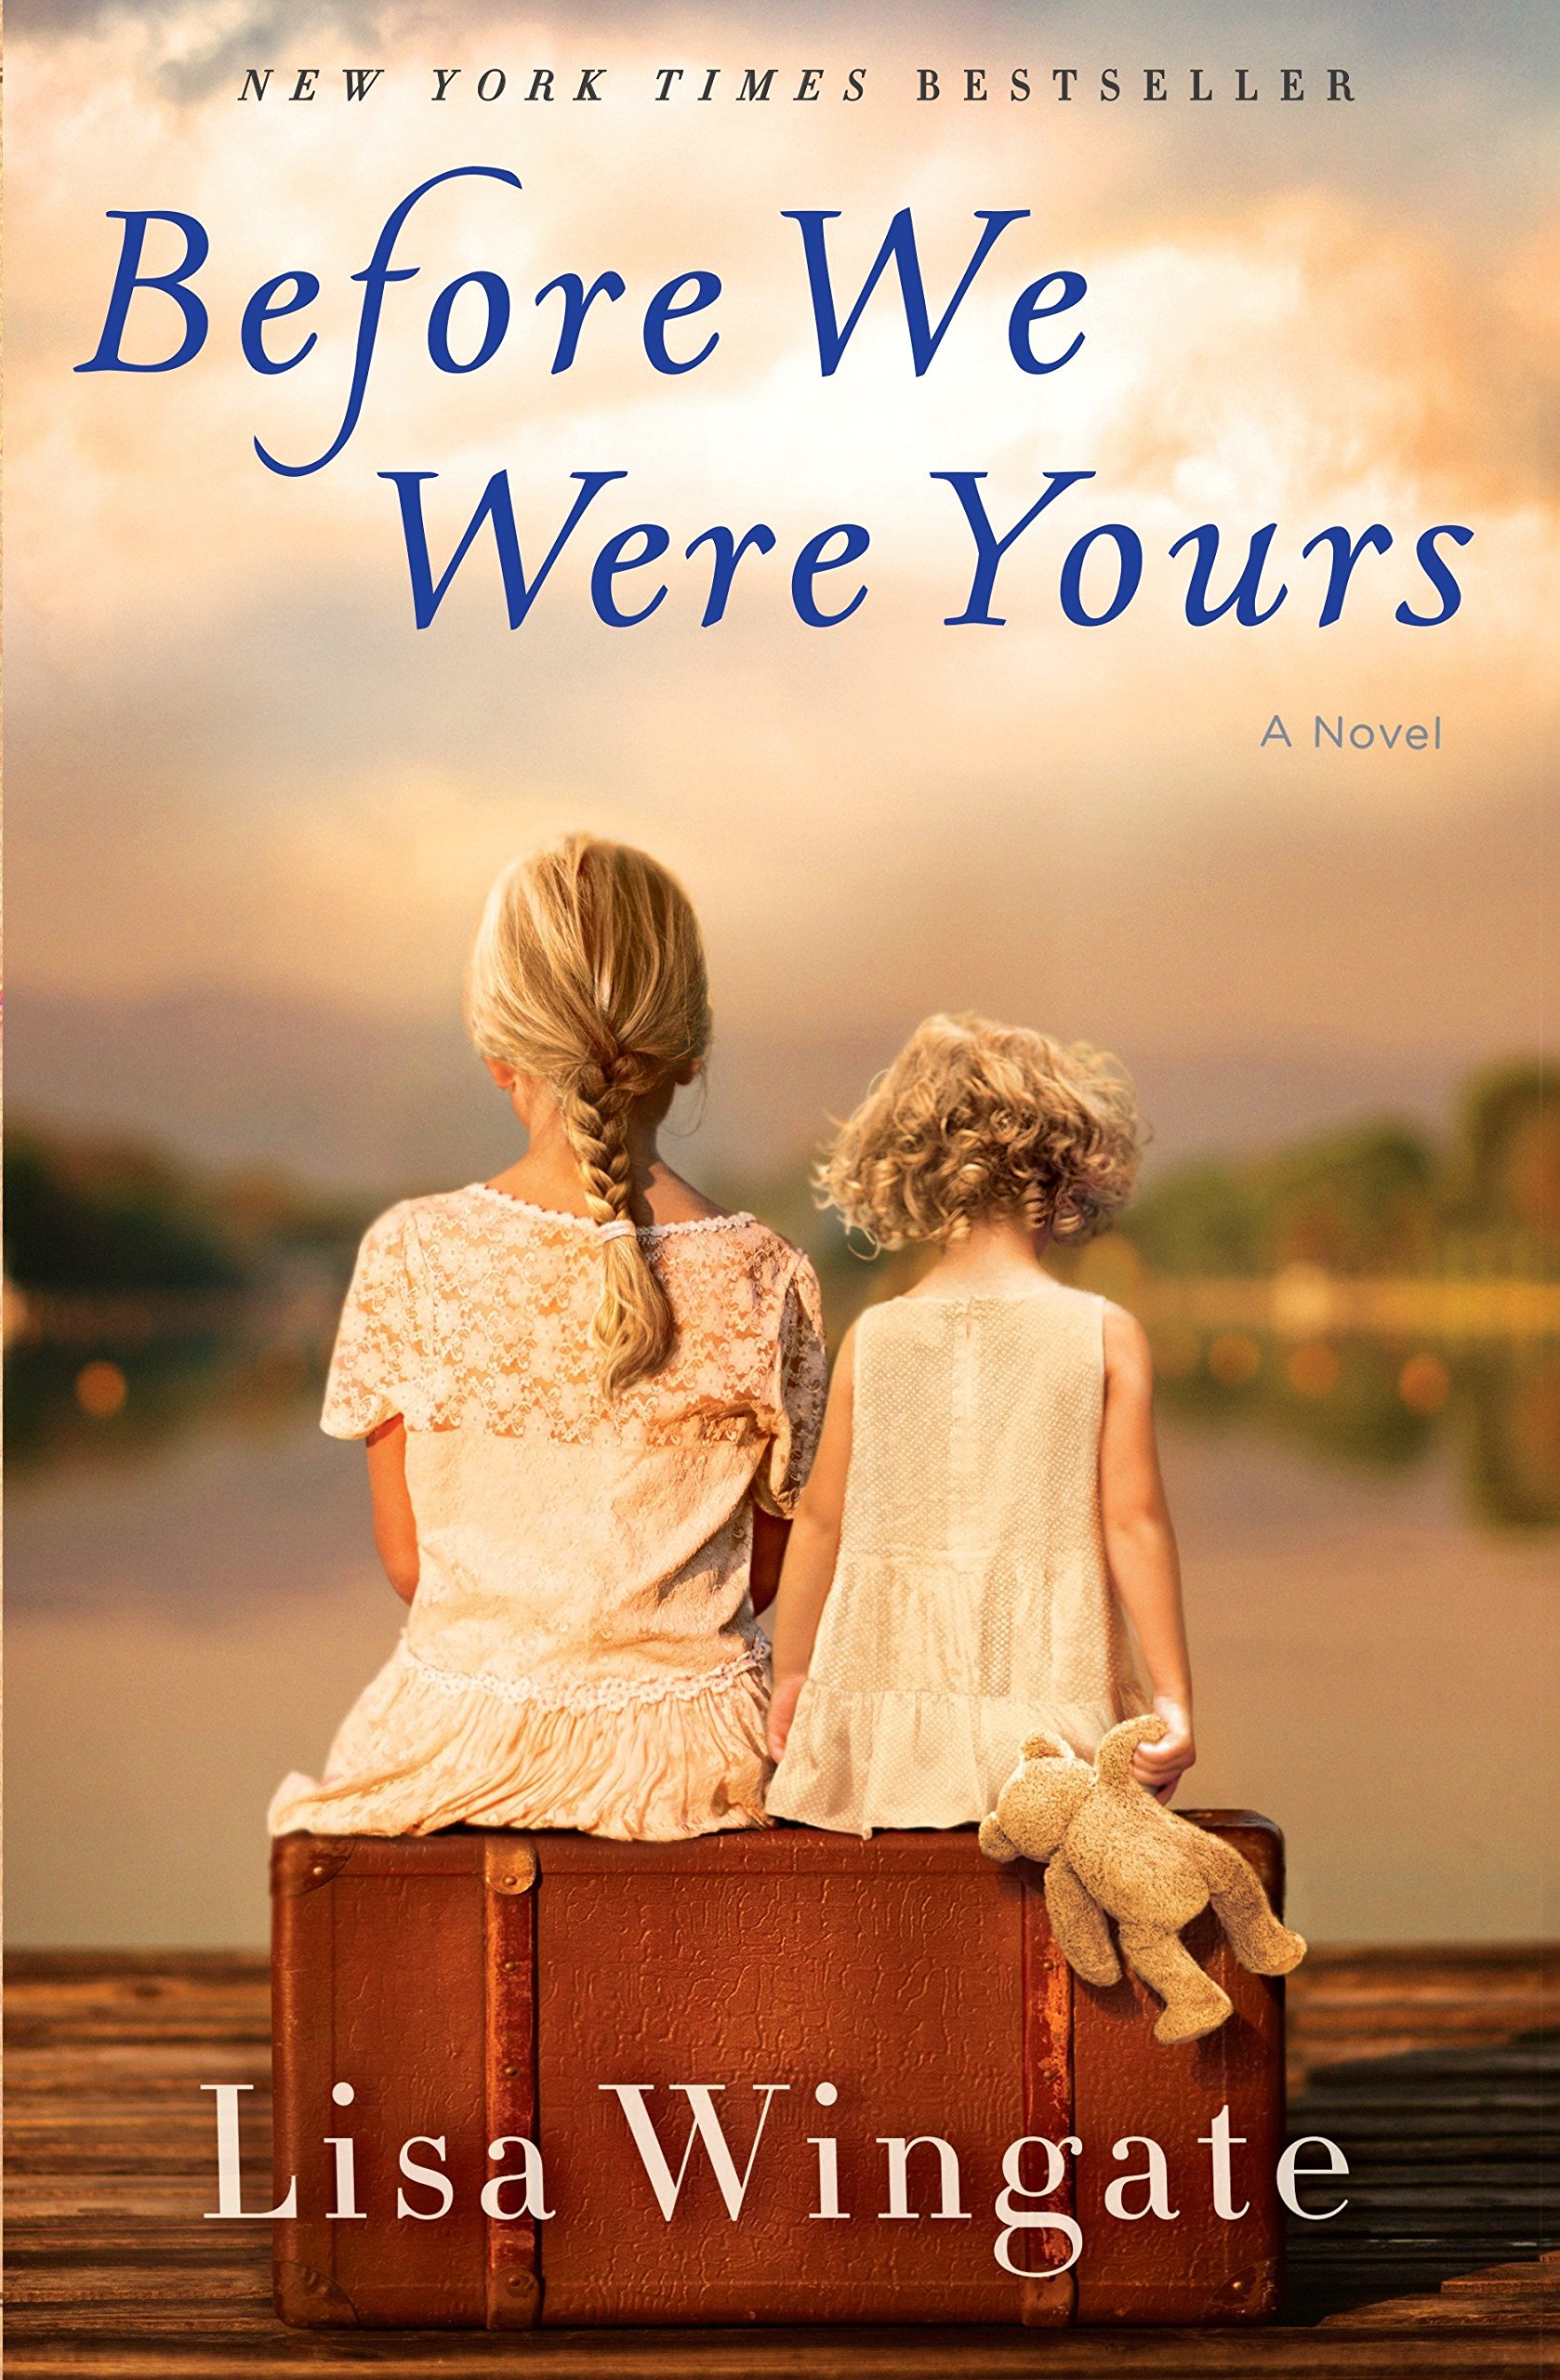 Before We Were Yours audiobook